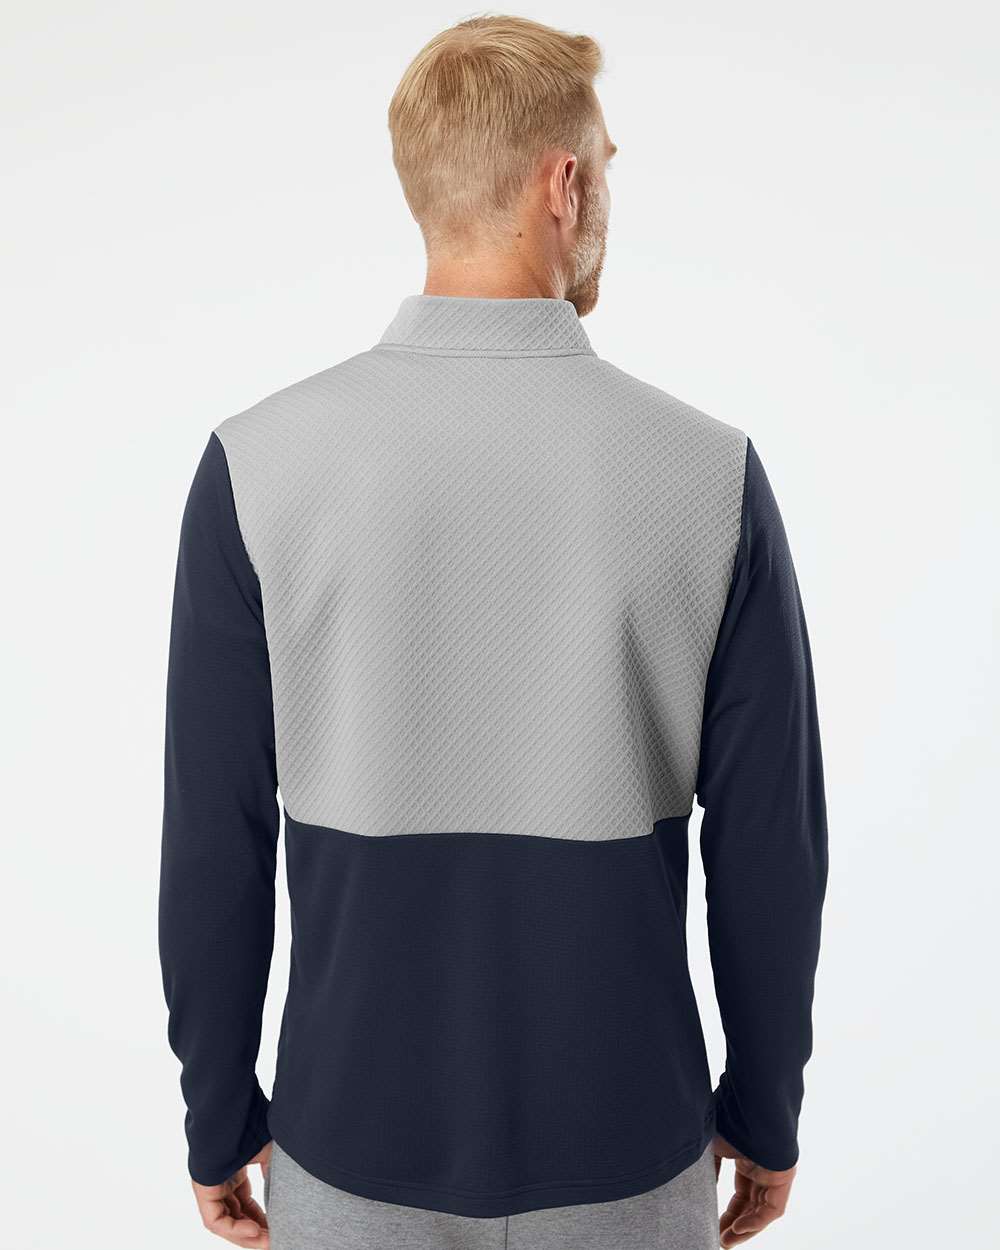 Adidas  A532 Textured Mixed Media Quarter-Zip Pullover #colormdl_Collegiate Navy/ Grey Three